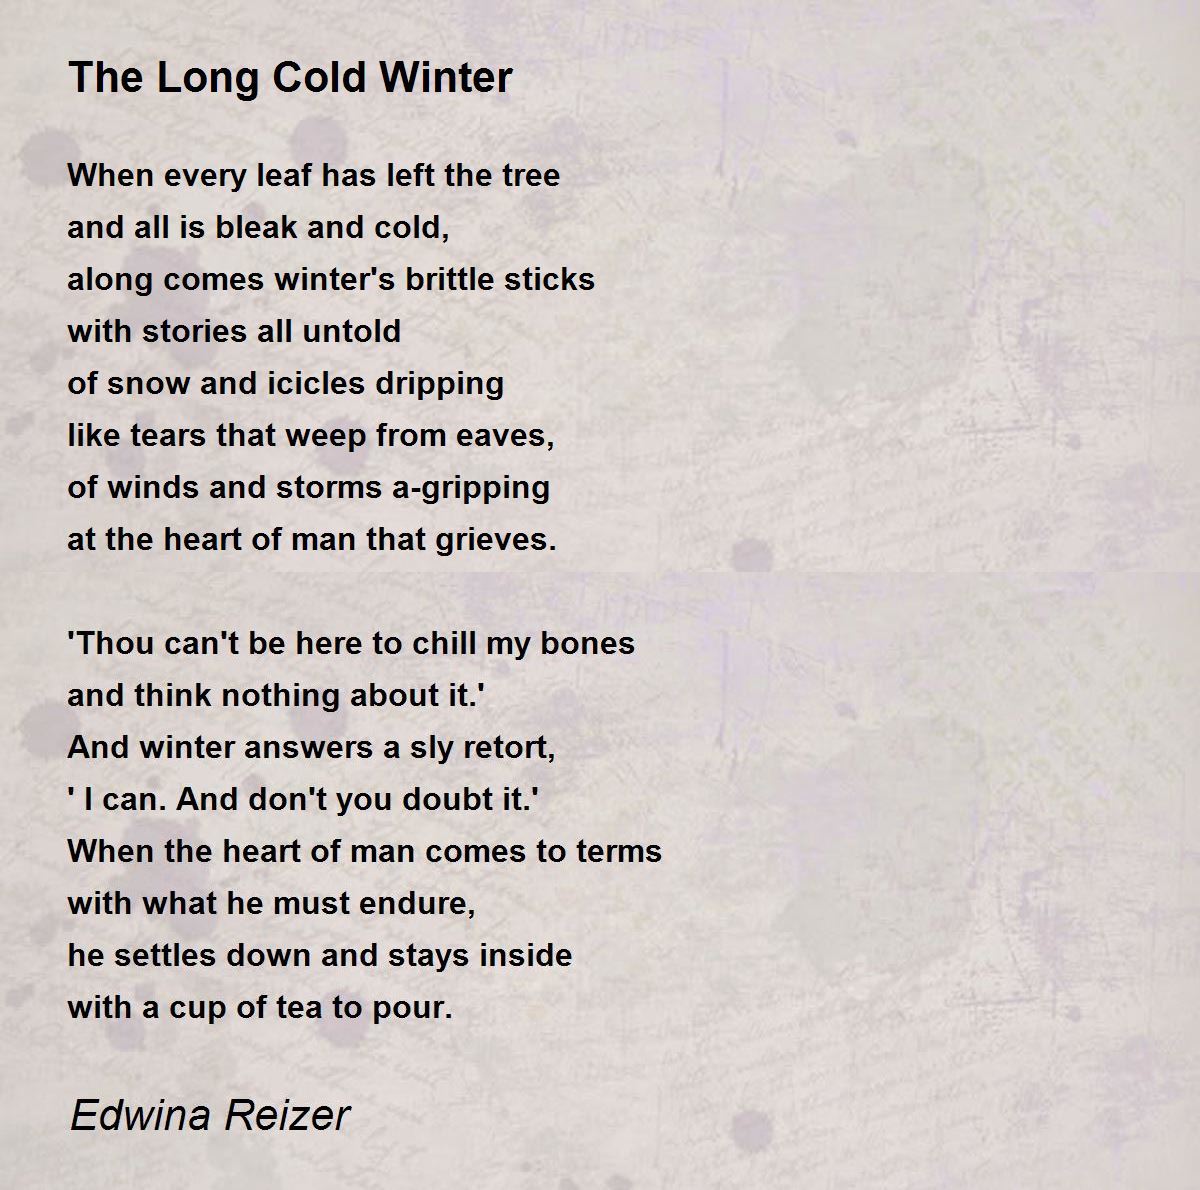 https://img.poemhunter.com/i/poem_images/584/the-long-cold-winter.jpg